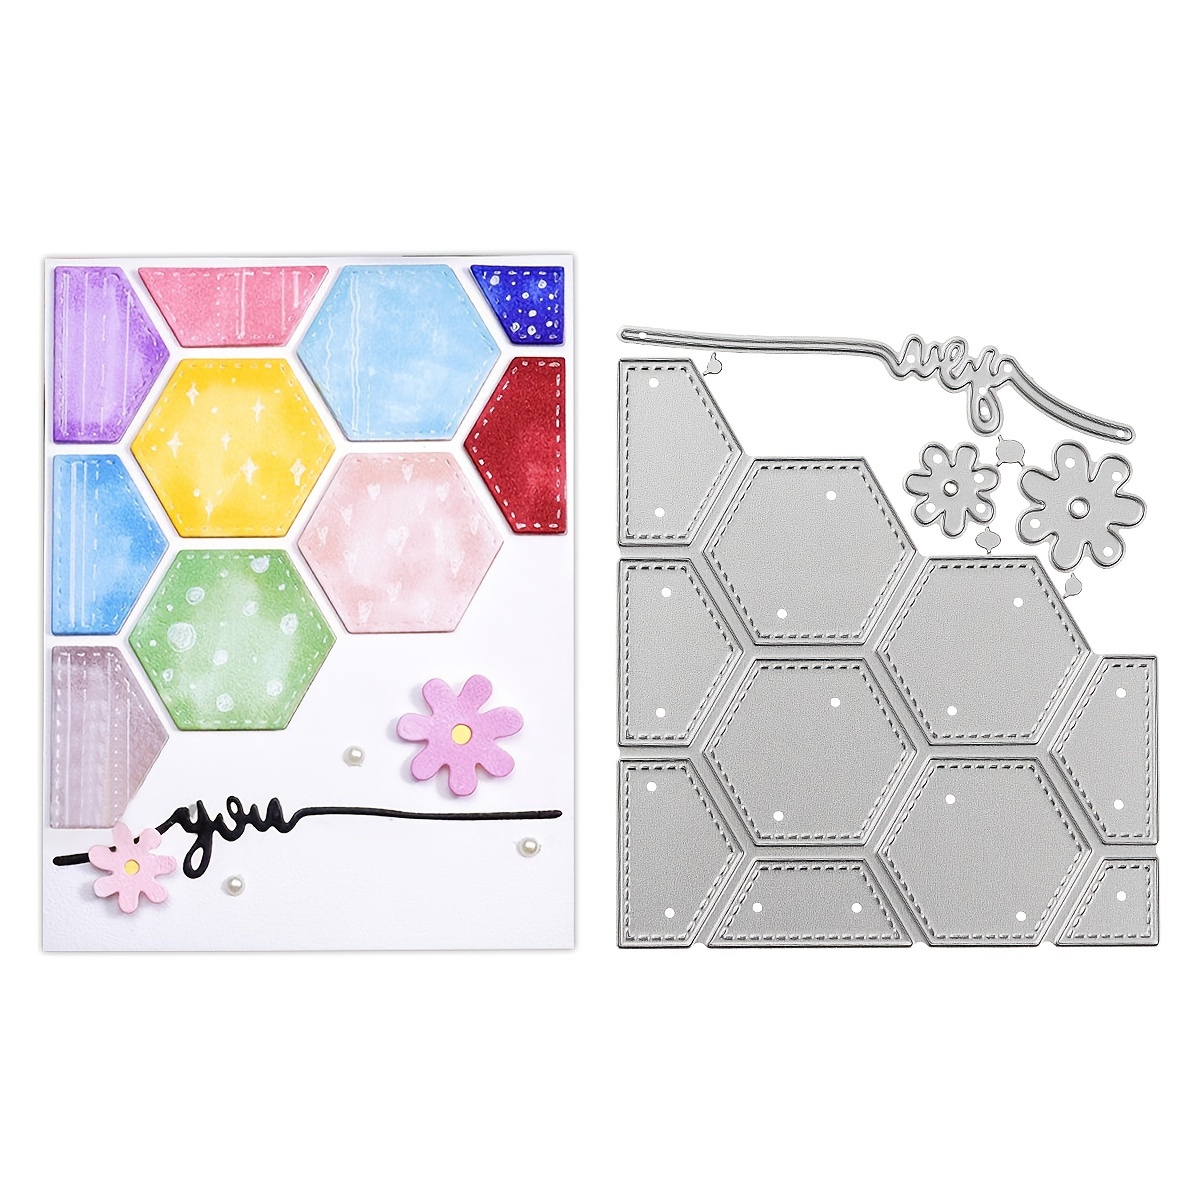 Alinacutle Hexagon & Square Layered Card Background Metal Die Cut, Layering  Cutting Die,Paper Craft Die-Cuts,Scrapbooking Cutting,DIY Card Metal Punch